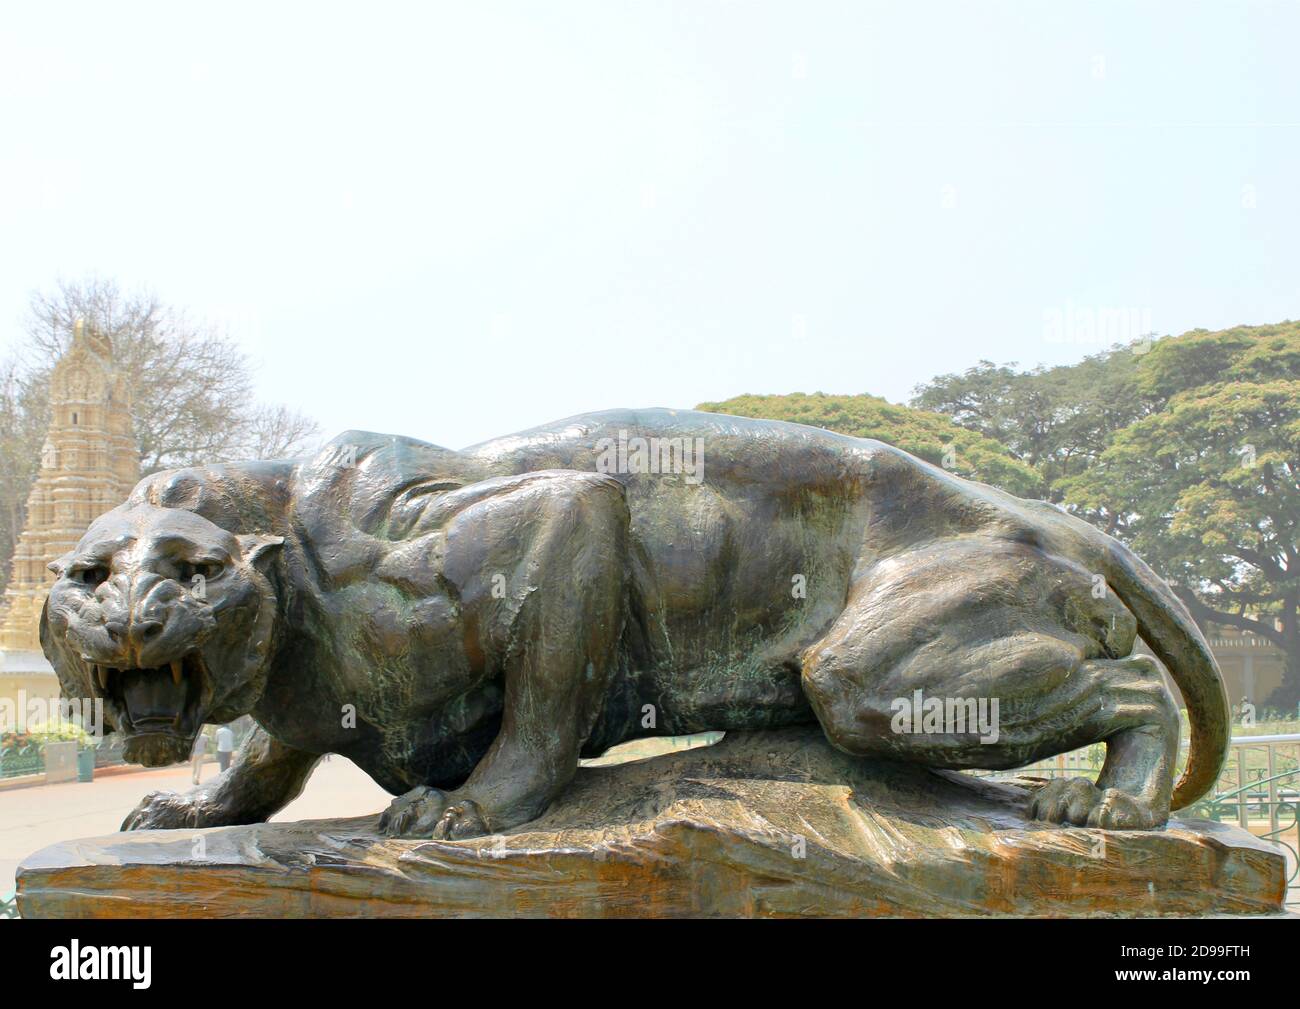 The Mysore Leopard statue which stands outside of Mysore Palace in